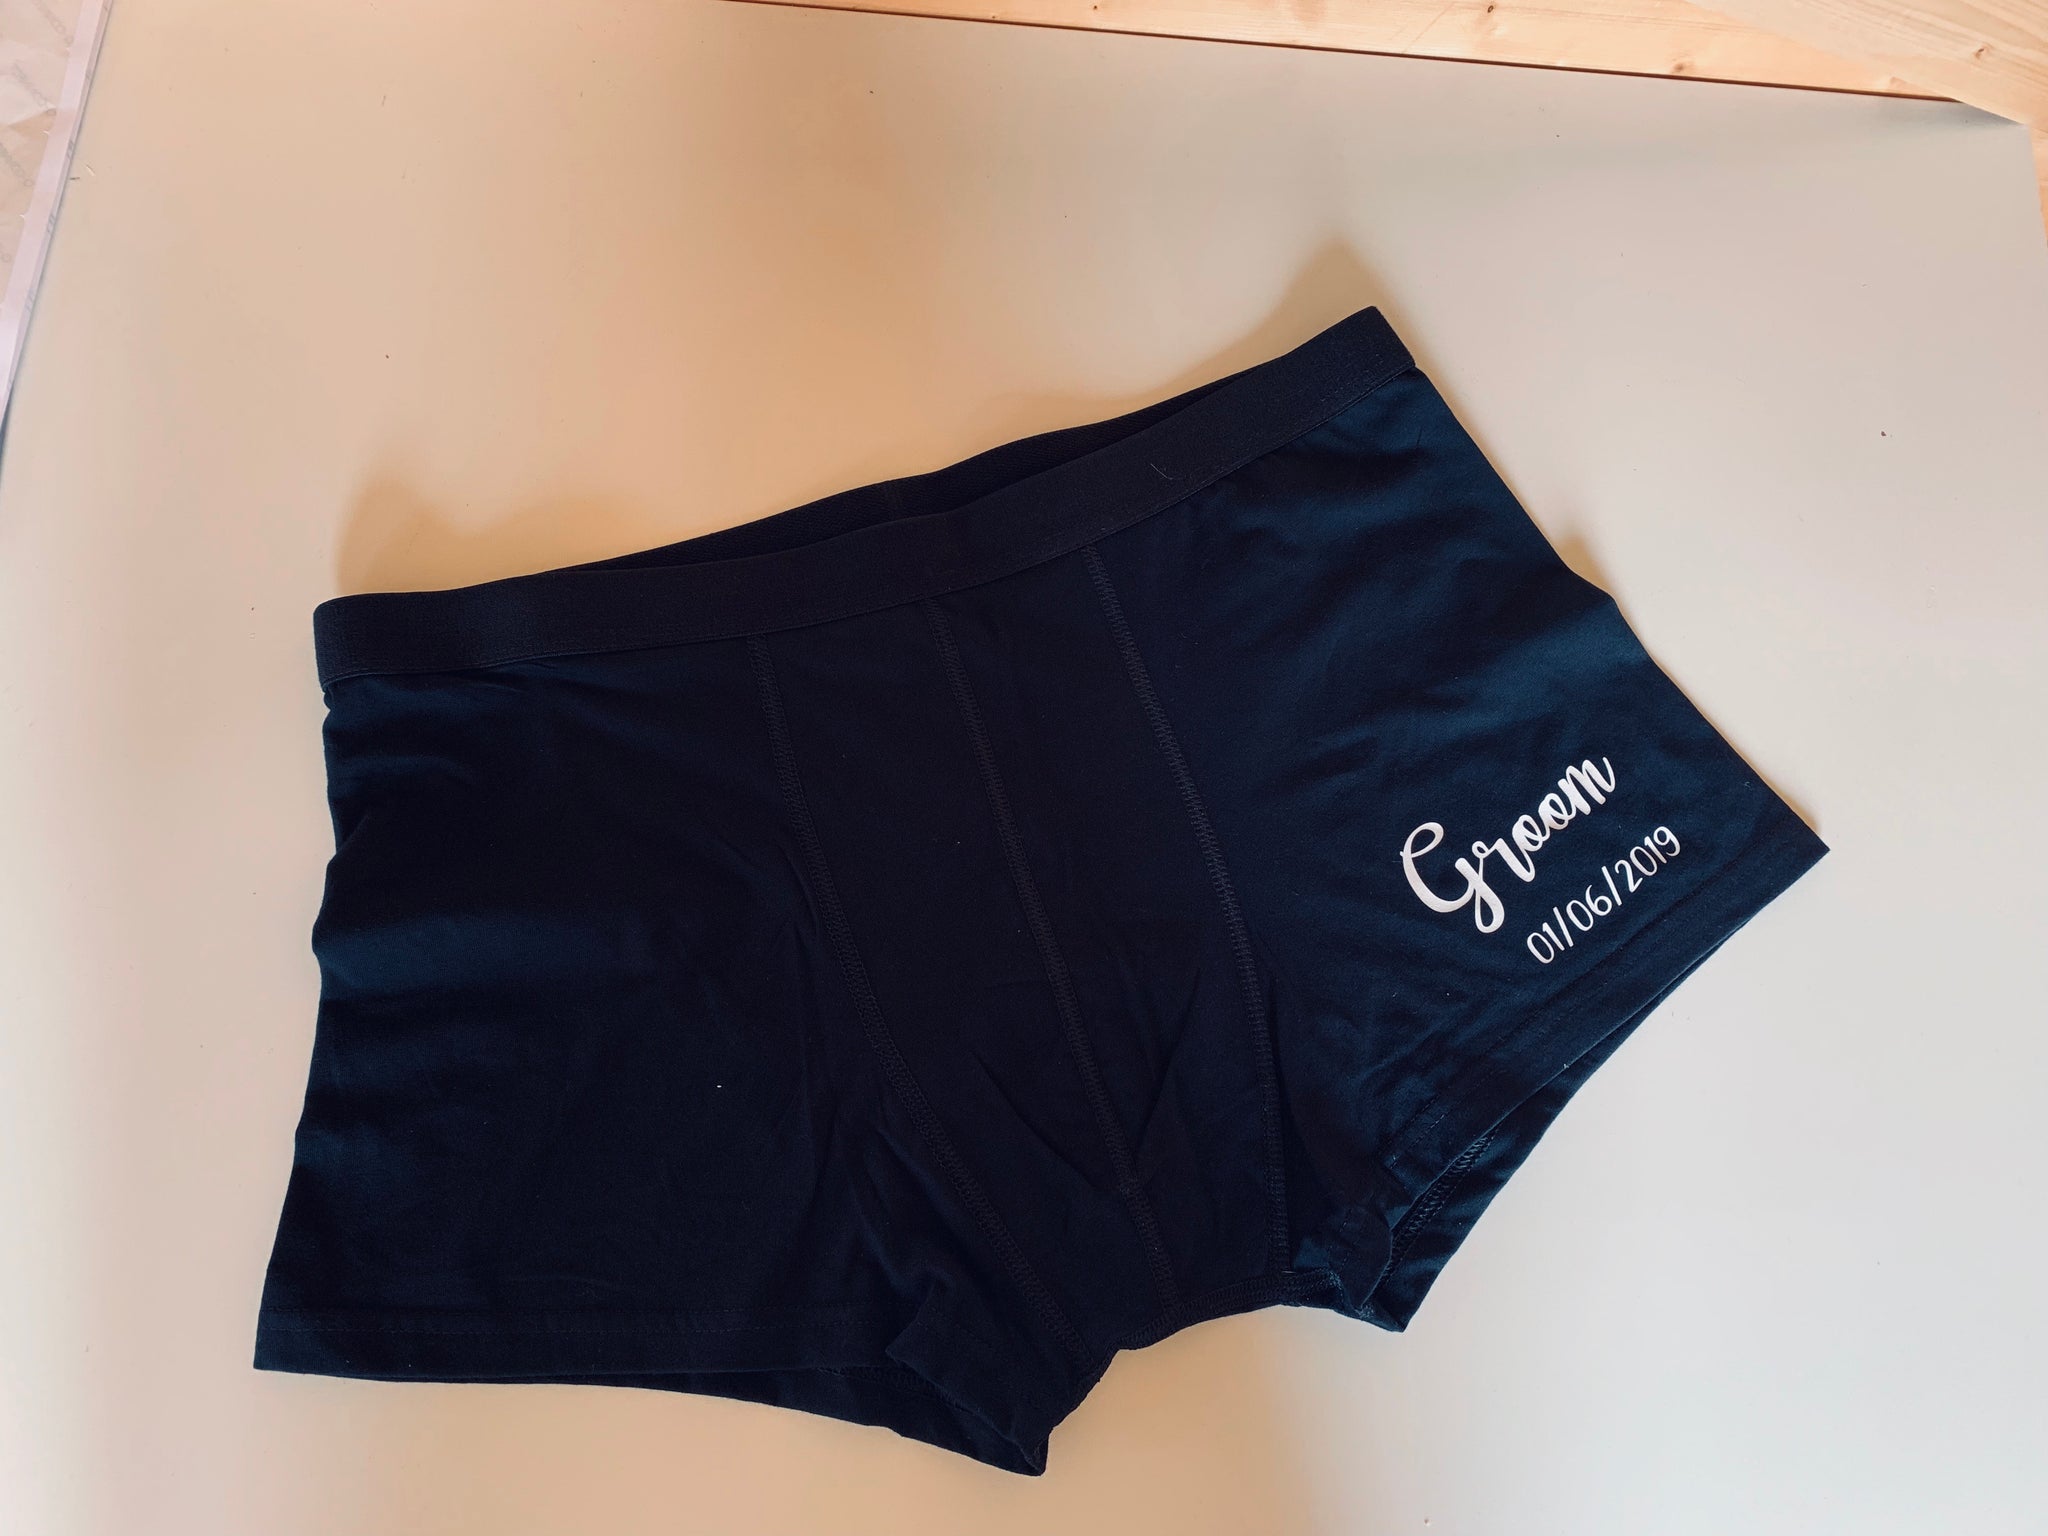 Personalised Boxers – Handmade by Helen Co